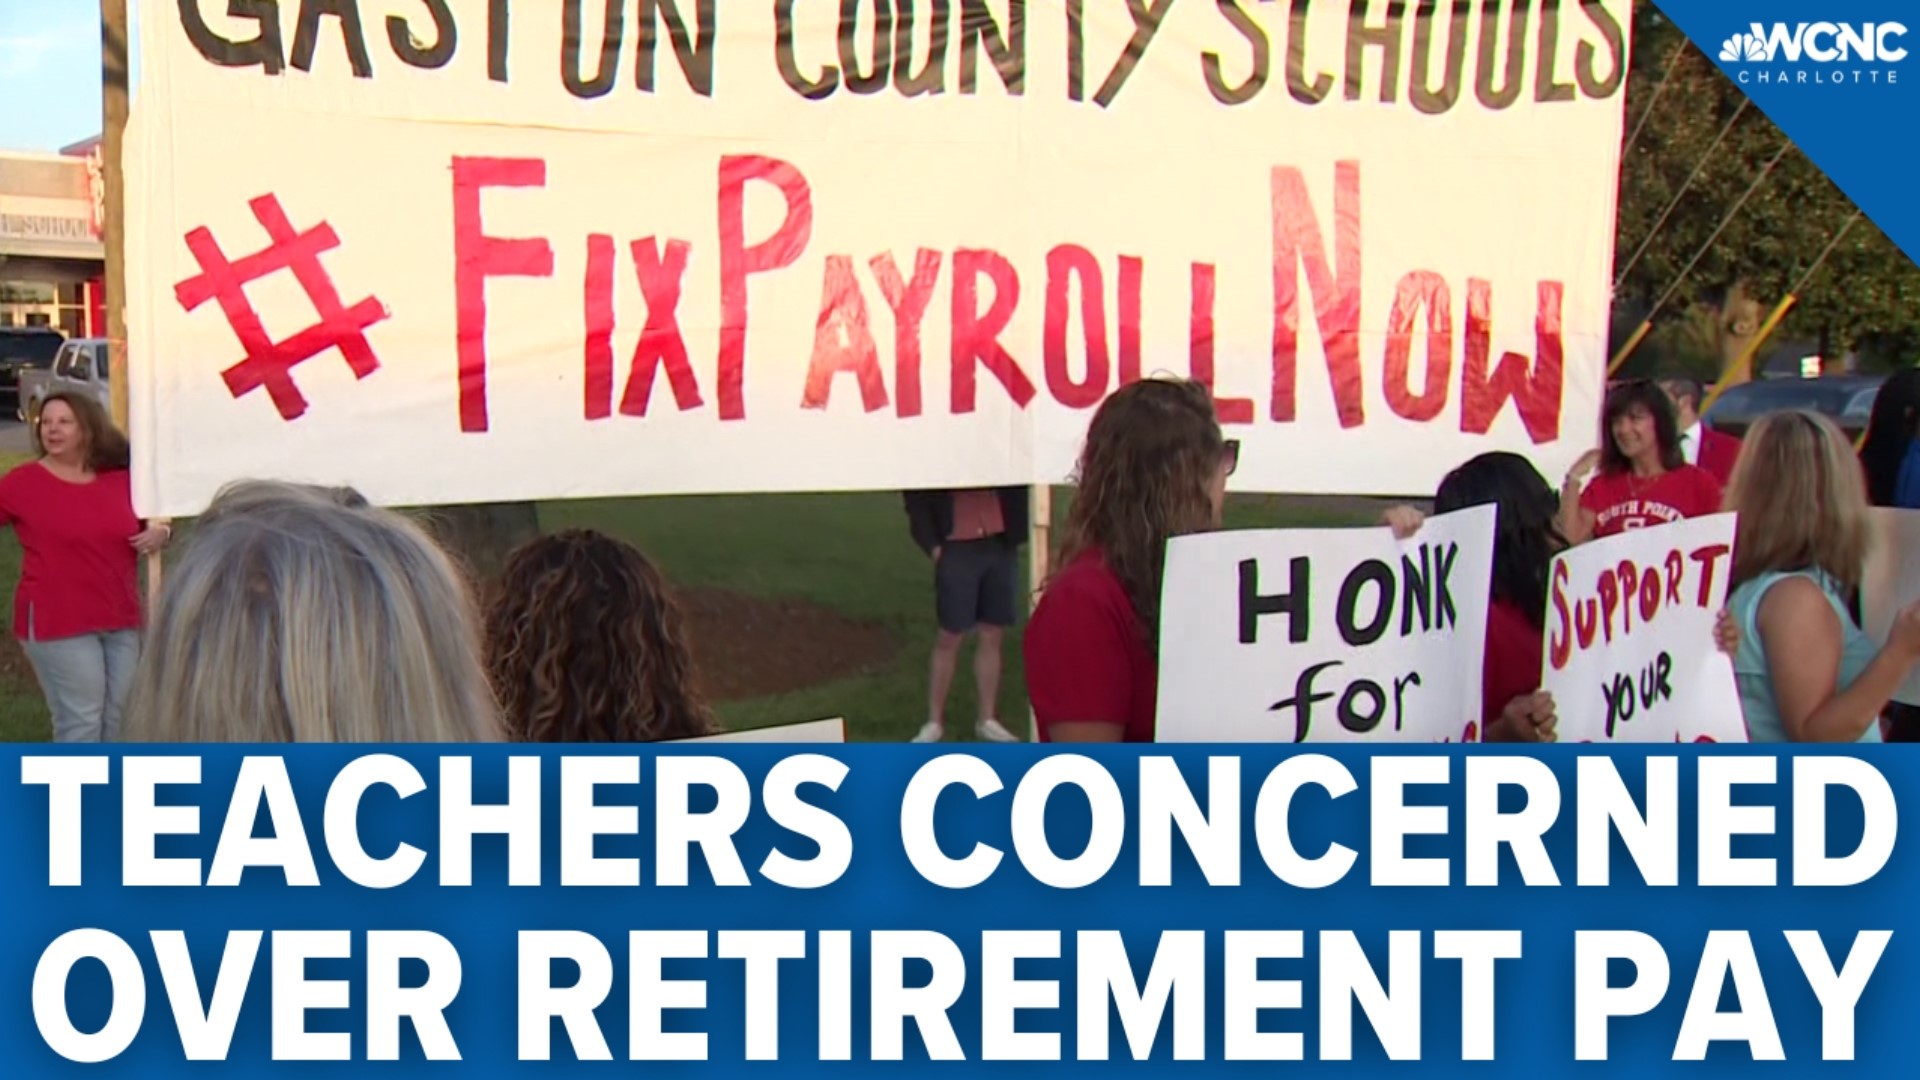 Gaston County School employees are protesting and pushing to receive correct paychecks.